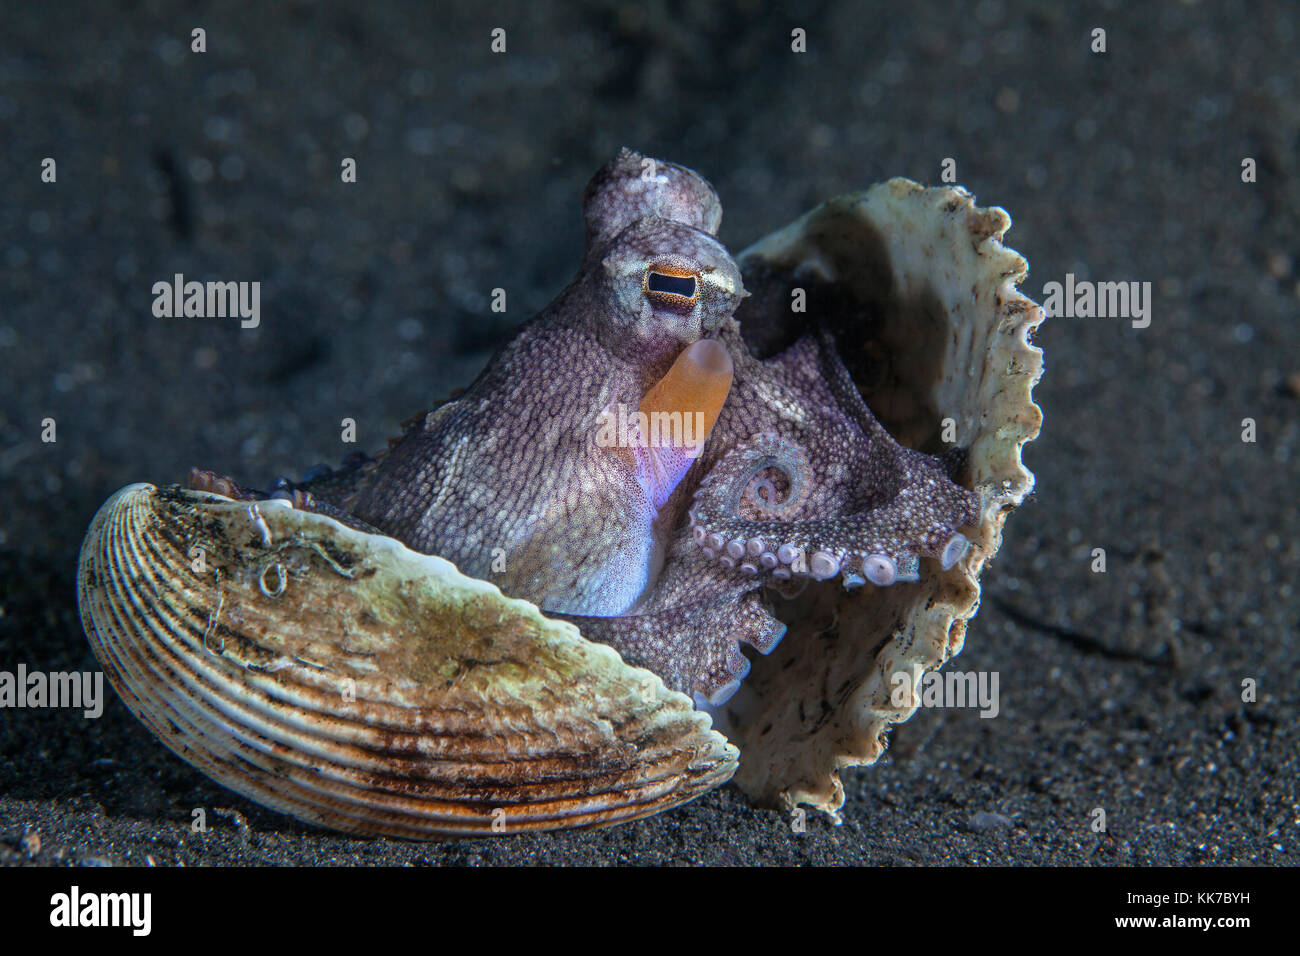 Coconut octopus ( Amphioctopus marginatus) occupies an abandoned shell on the ocean floor. Lembeh Straits, Indonesia. Stock Photo